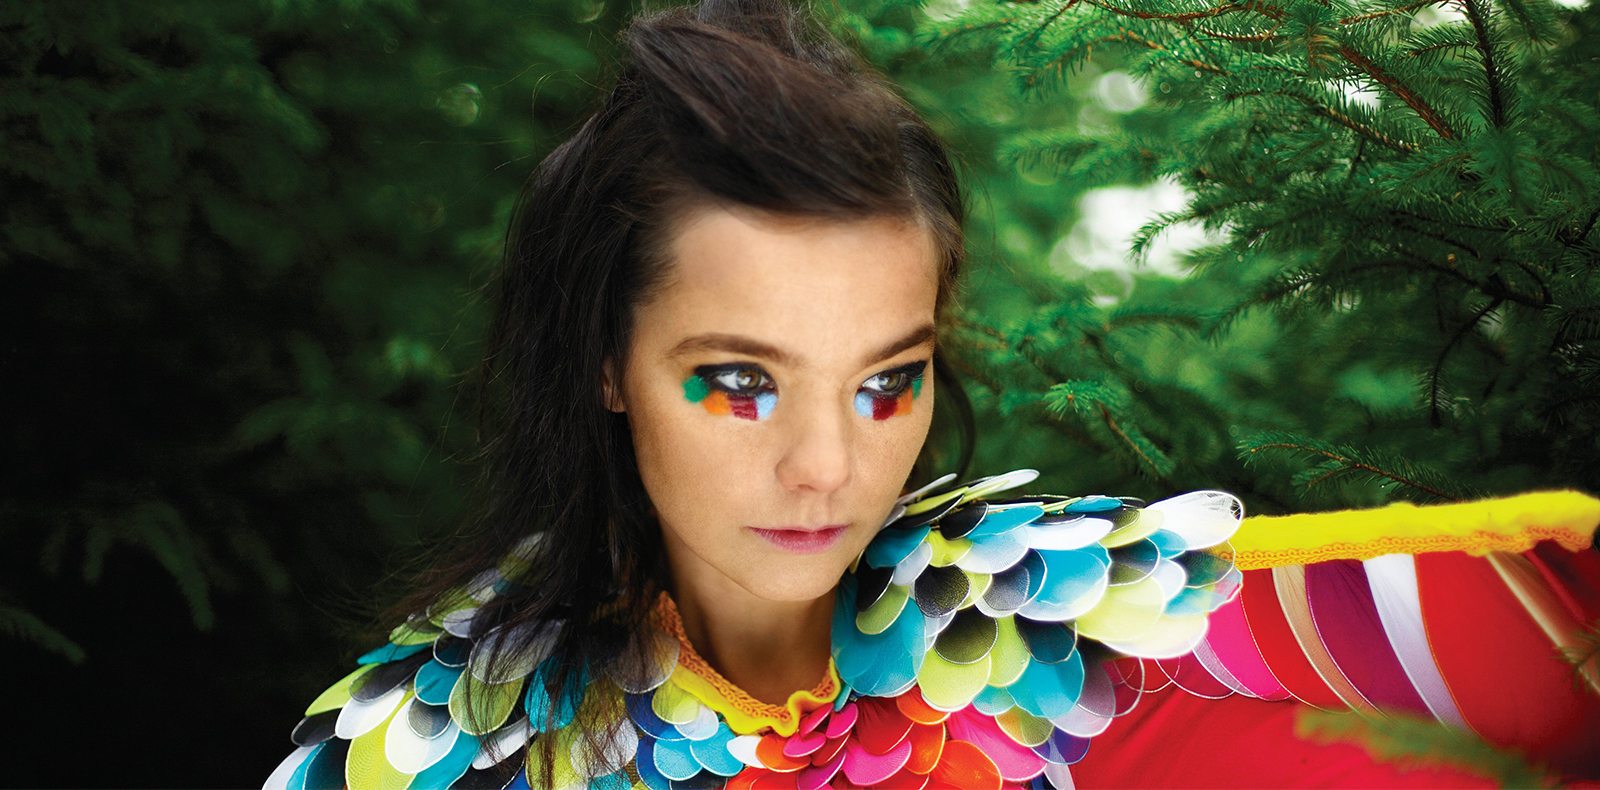 Björk’s new track changes with the weather